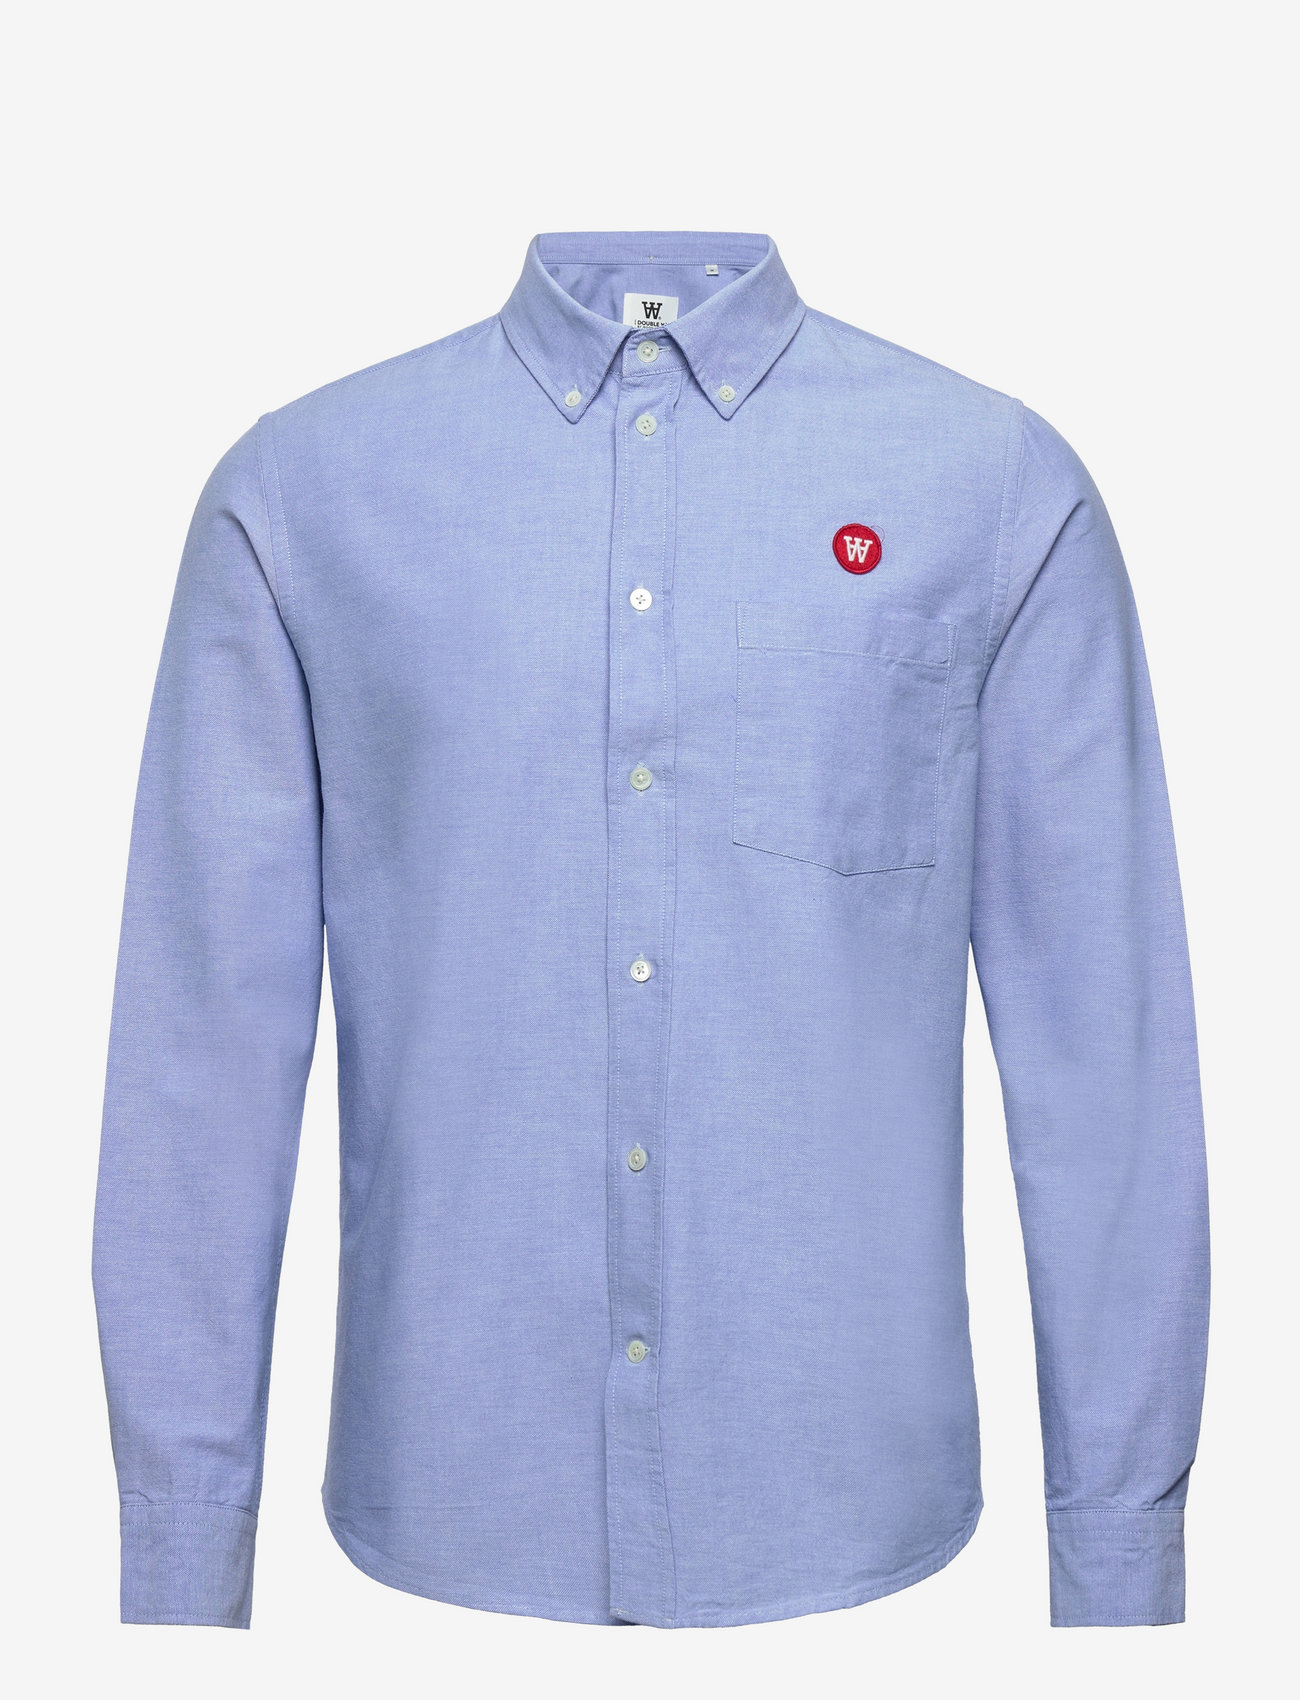 Double A by Wood Wood - Tod shirt - basic skjorter - light blue - 0